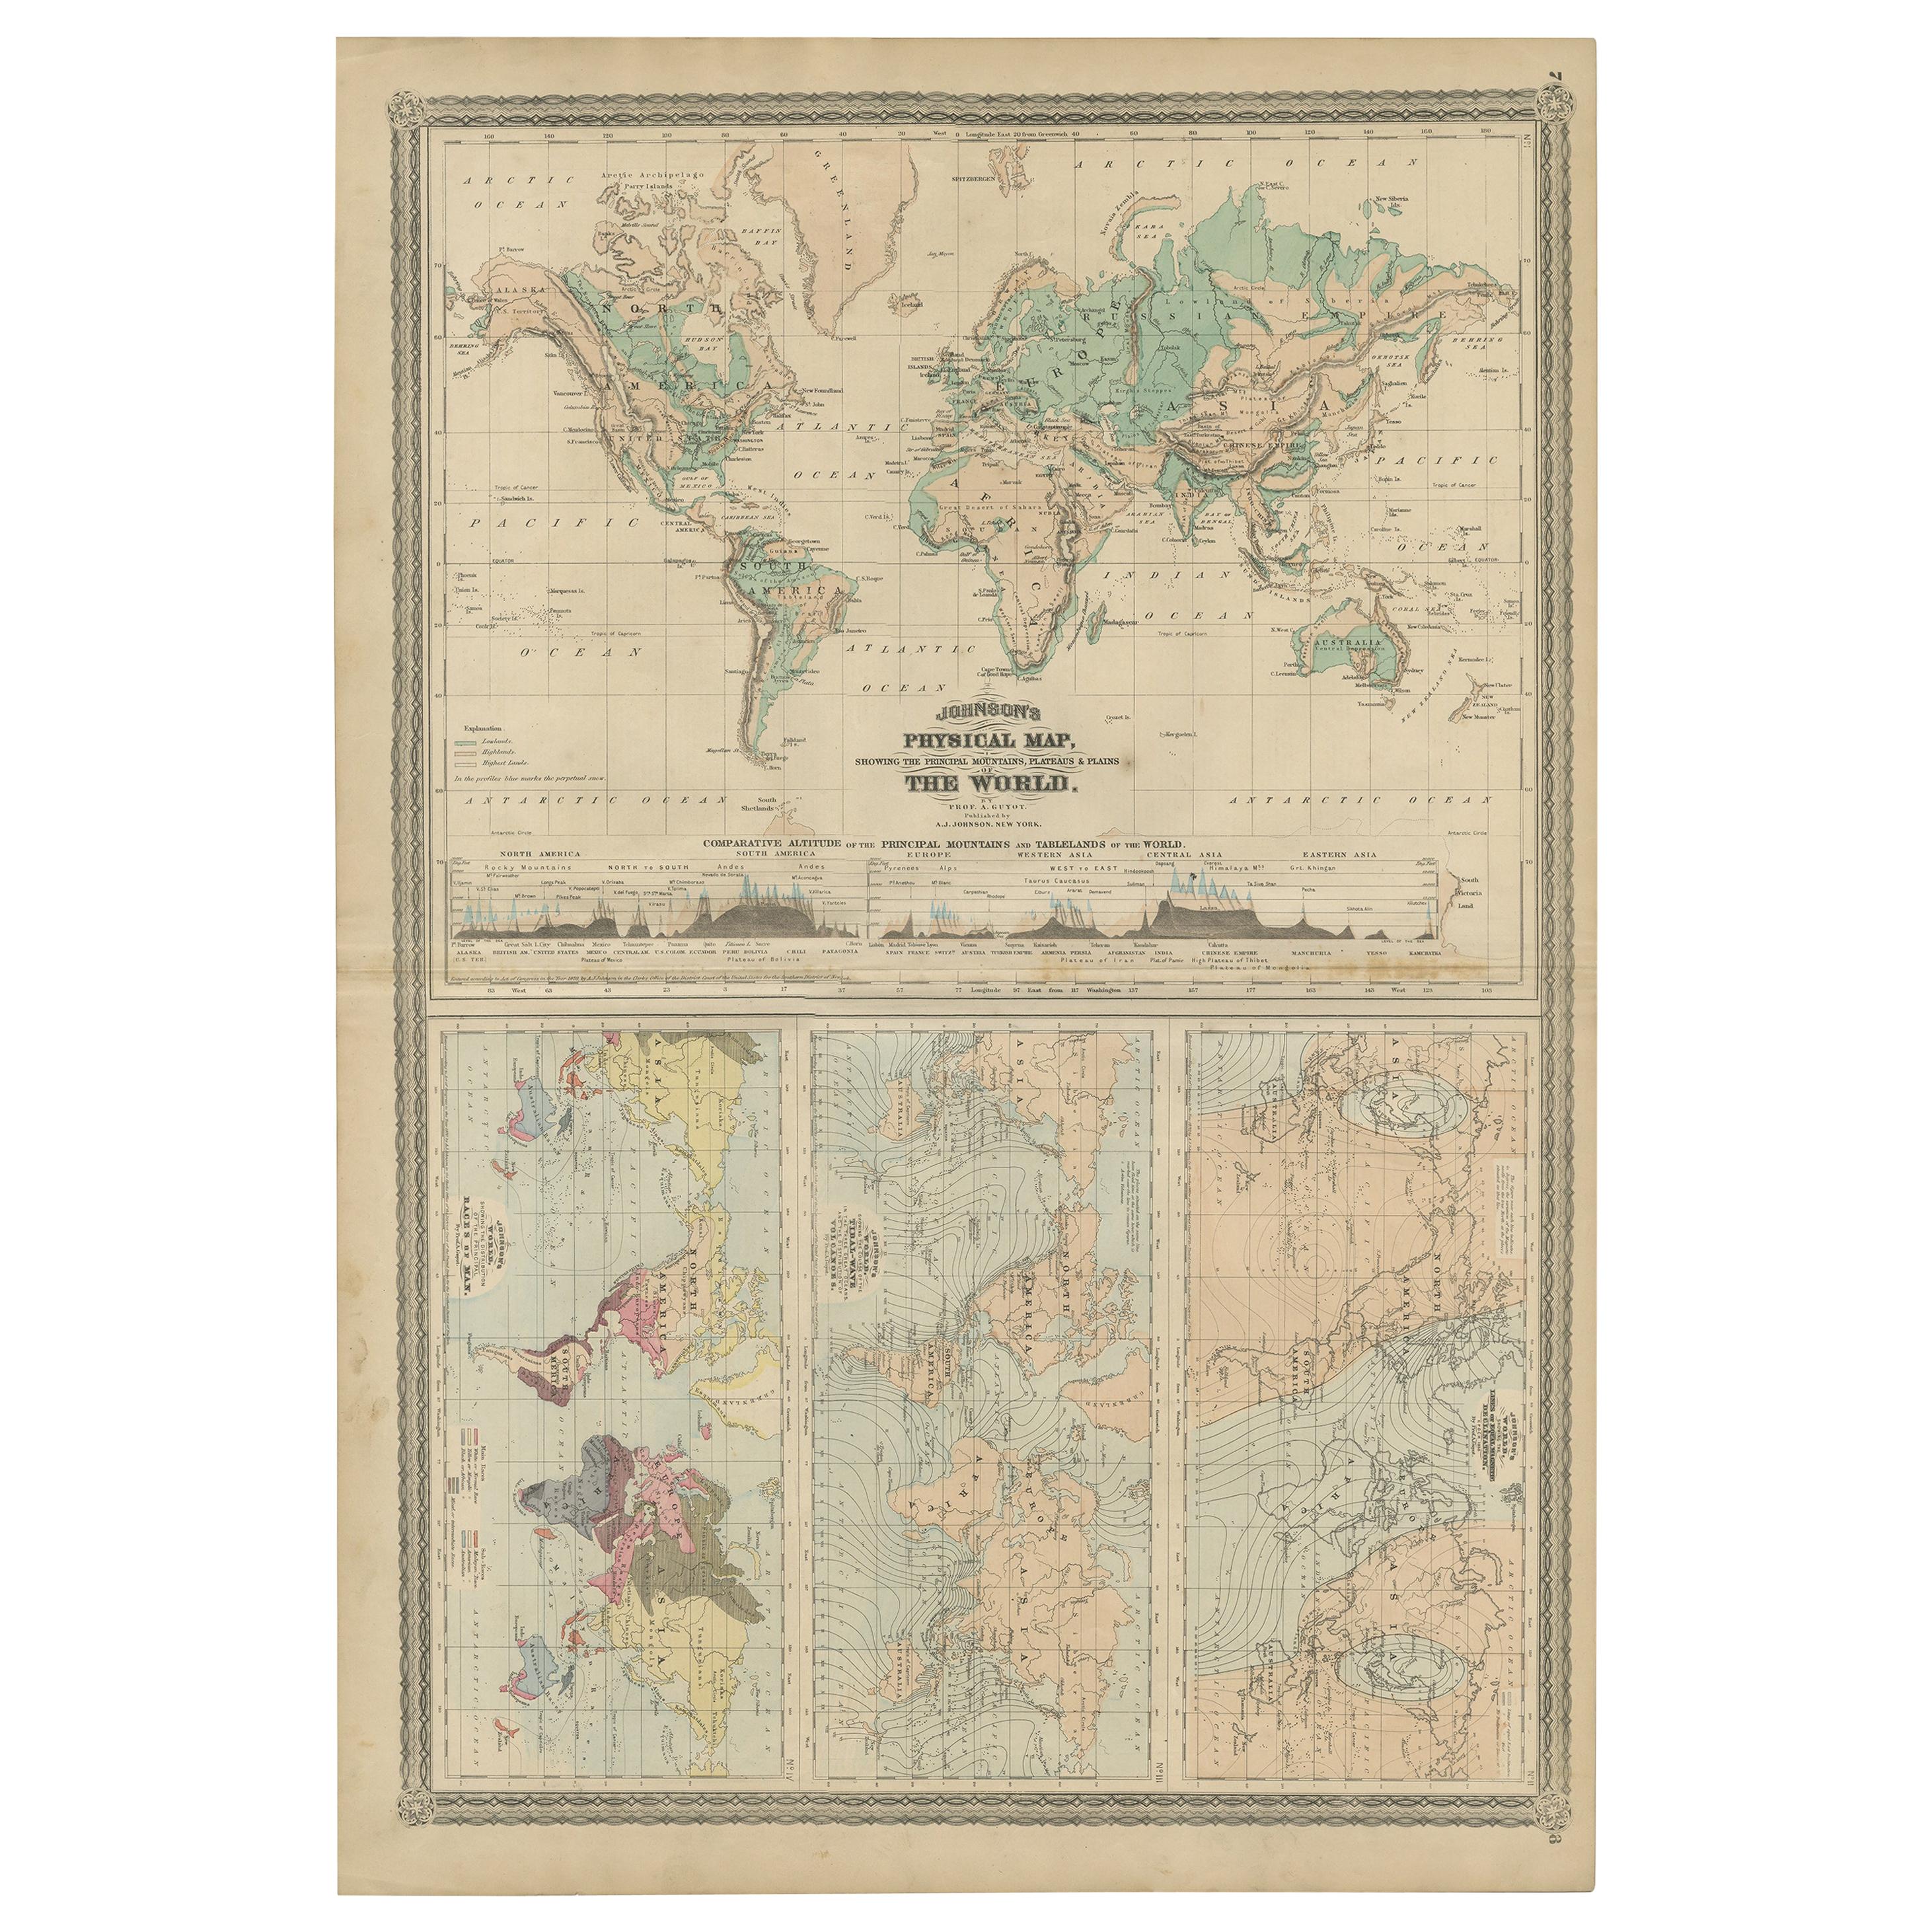 Four physical maps of the world on one sheet. The upper map shows lowlands, highlands and highest lands. The other maps show world's races, ocean current and volcanoes, and magnetic declination. This map originates from 'Johnson's New Illustrated